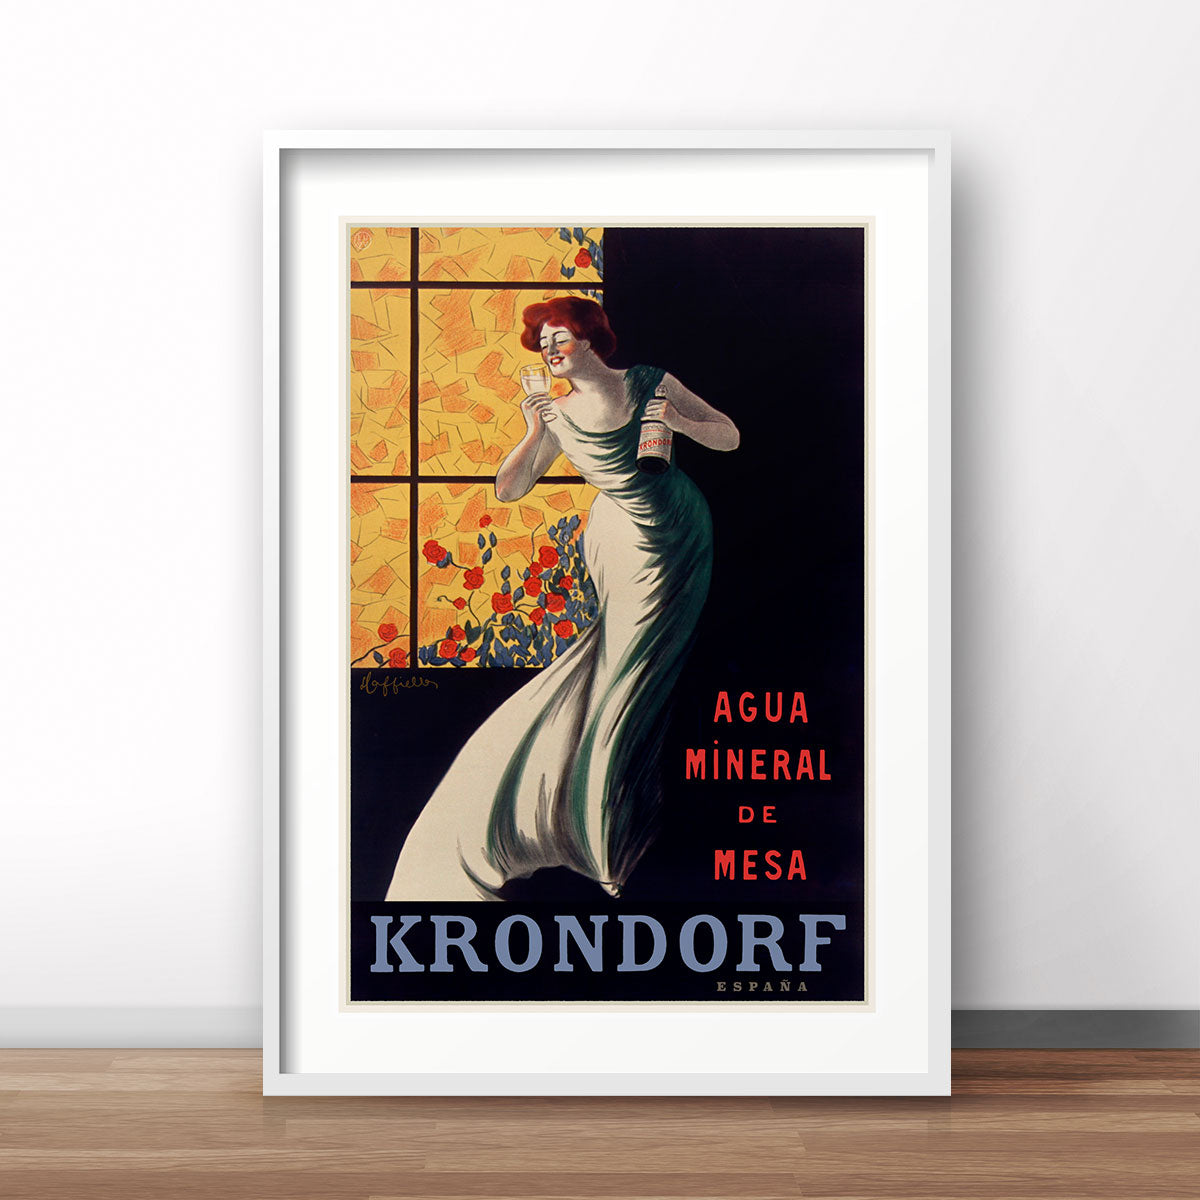 Krondorf retro vintage advertising poster print from Places We Luv